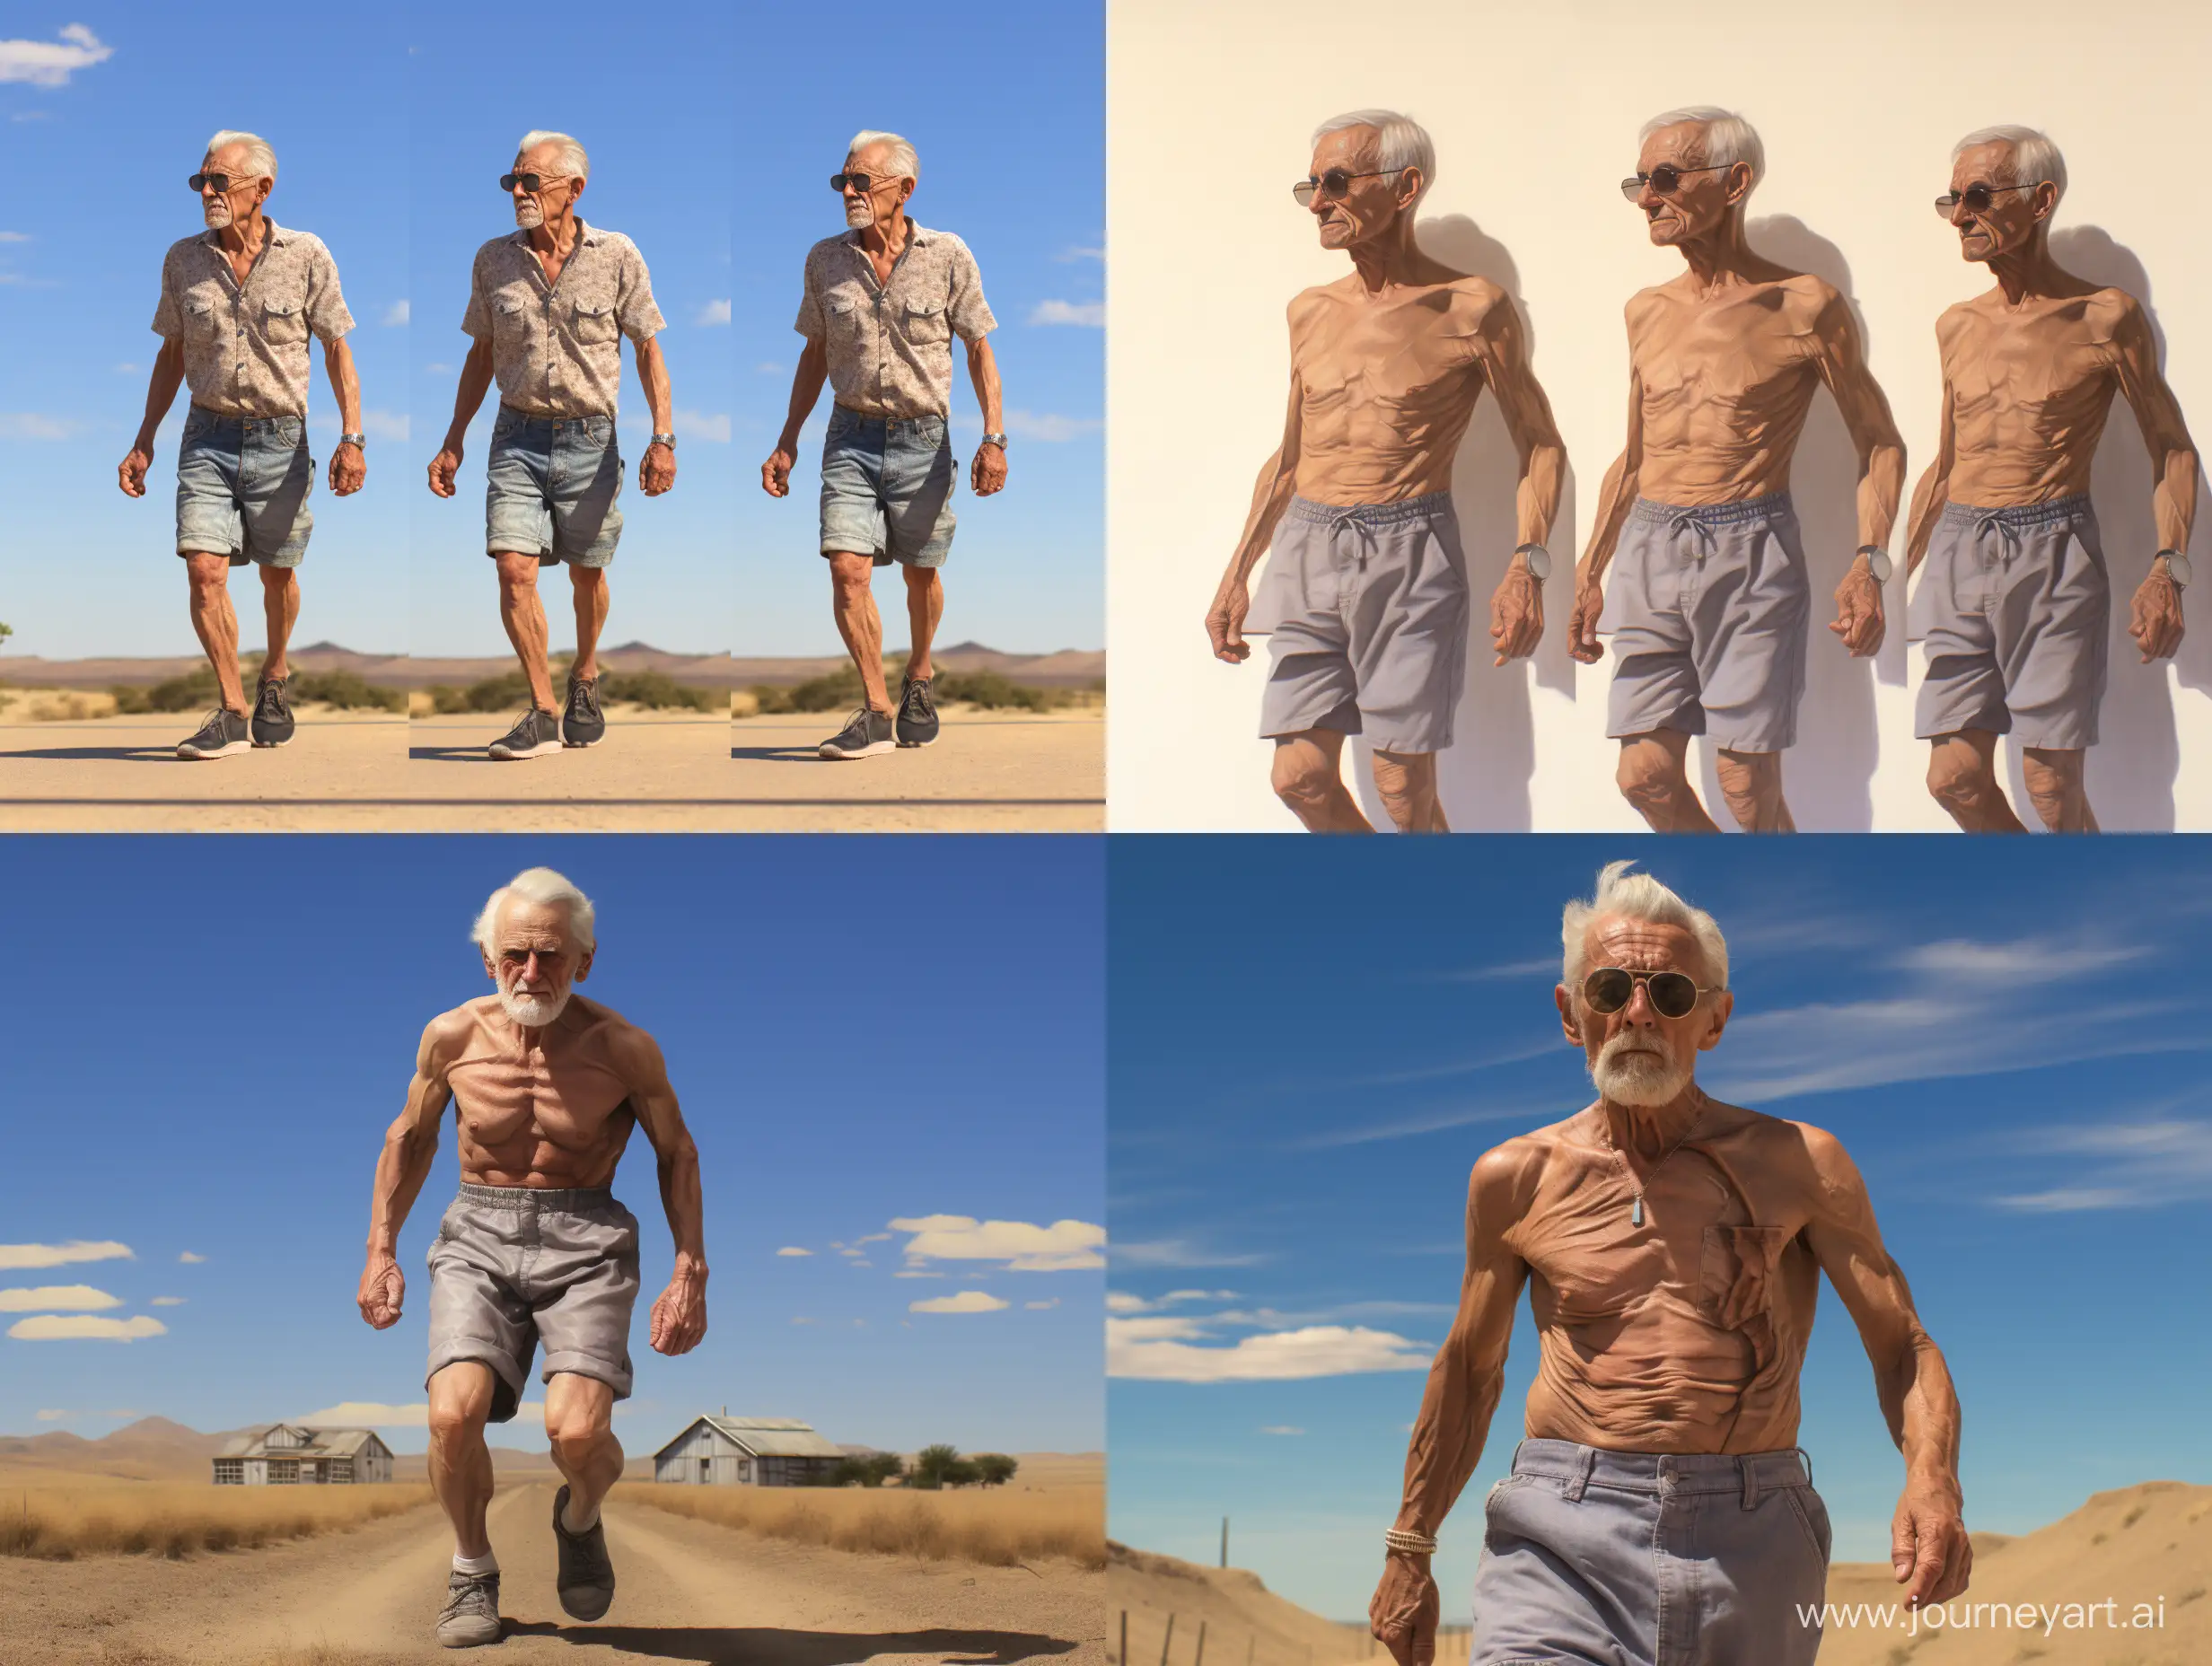 Elderly-Fitness-Enthusiast-with-Sculpted-Physique-Enjoying-Sunlight